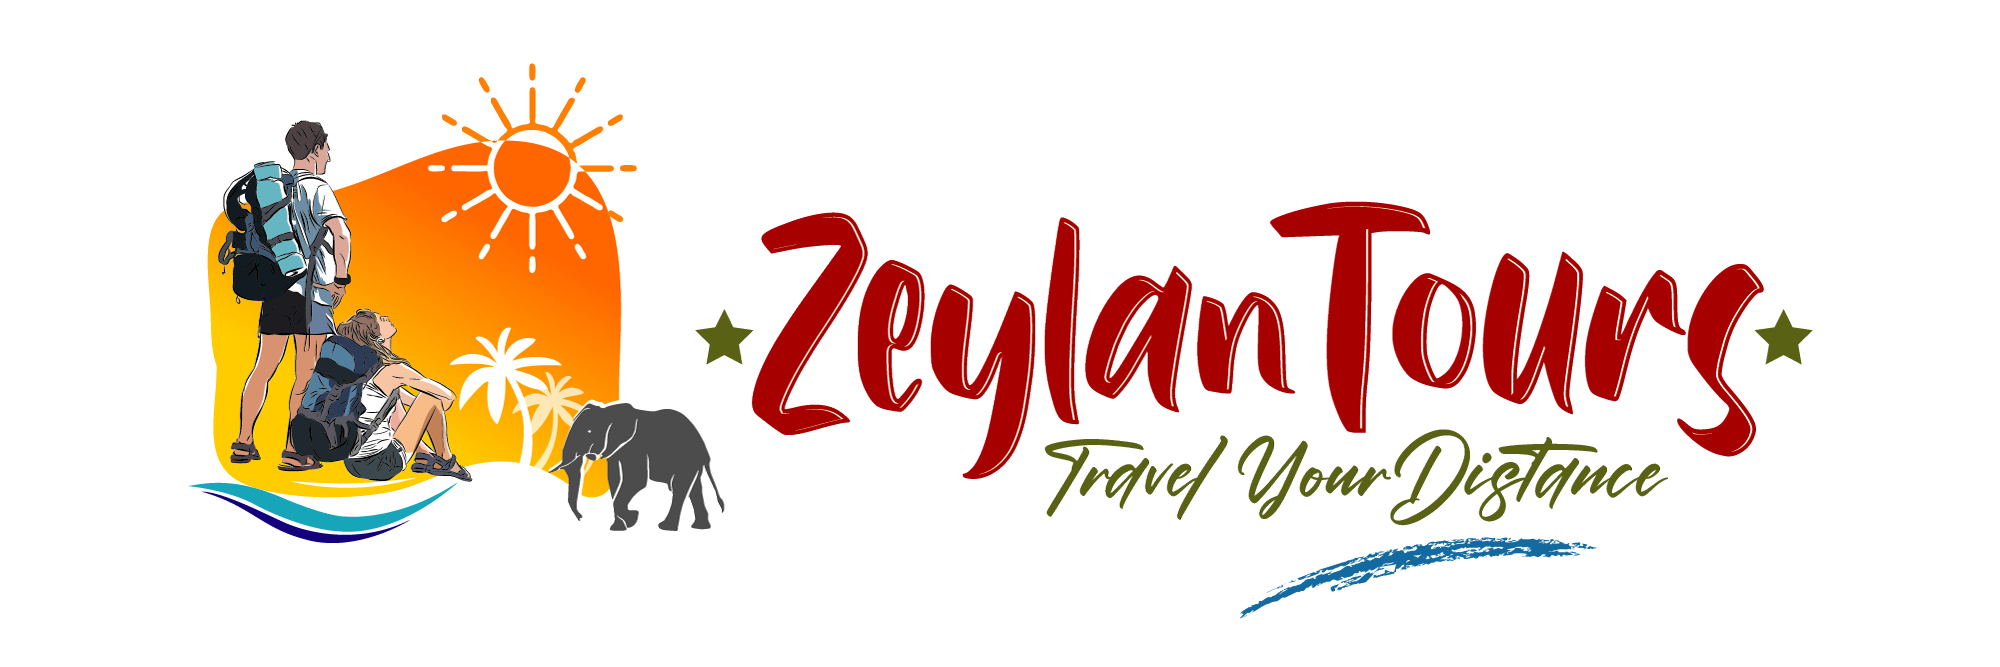 Discover Sri Lanka: Best Tour Packages with Zeylan Tours and Travels